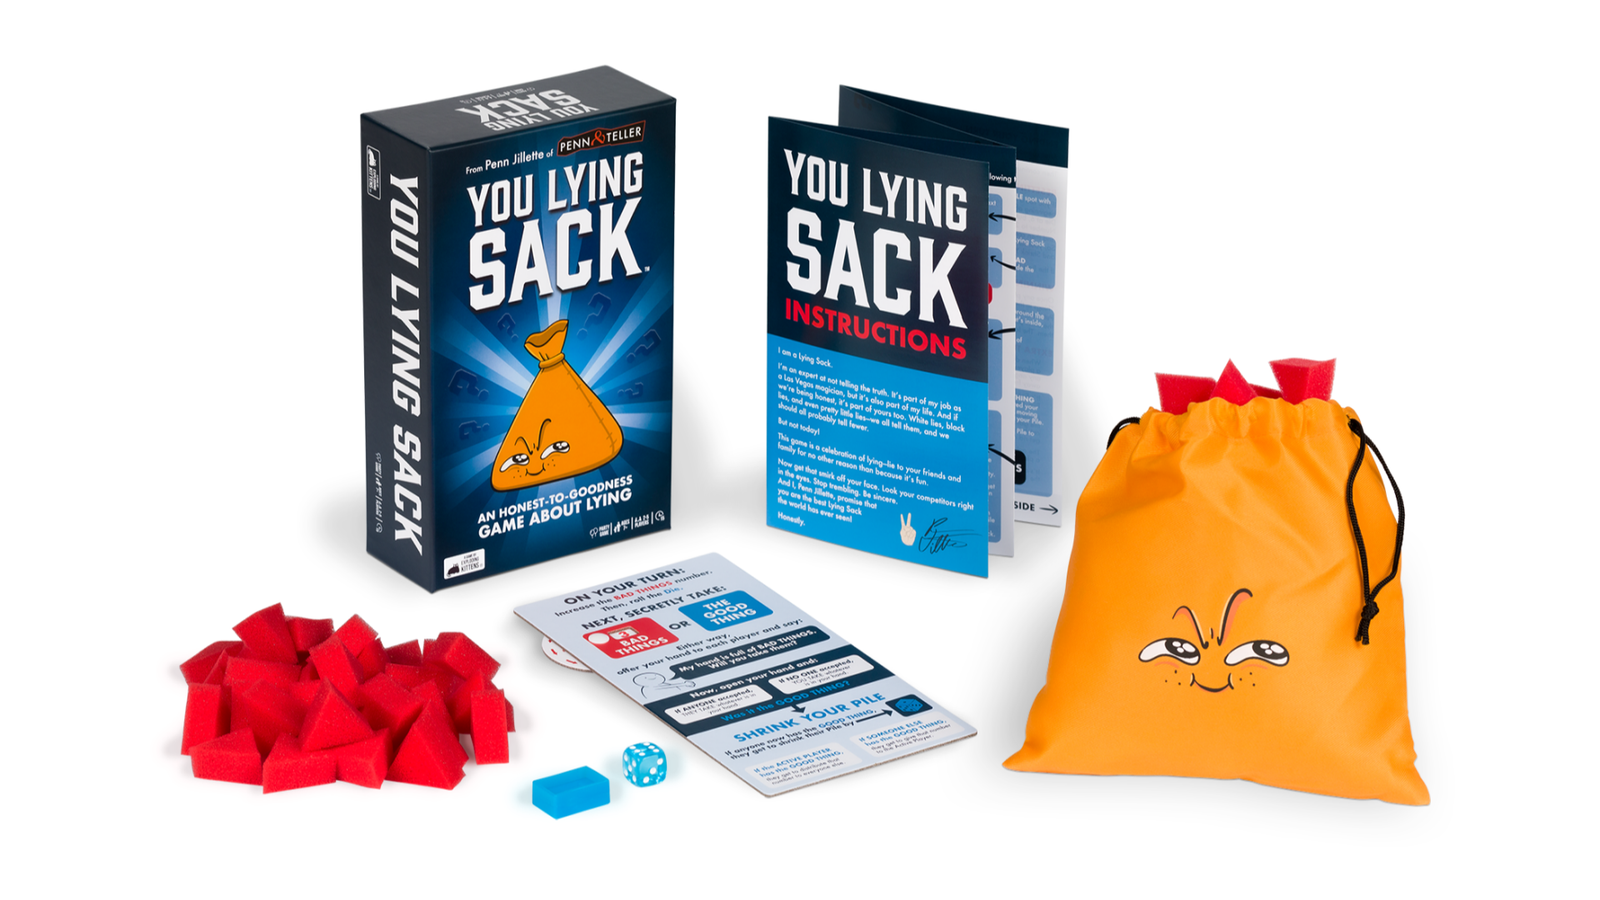 Exploding Kittens and Penn Jillette's new party game is for all